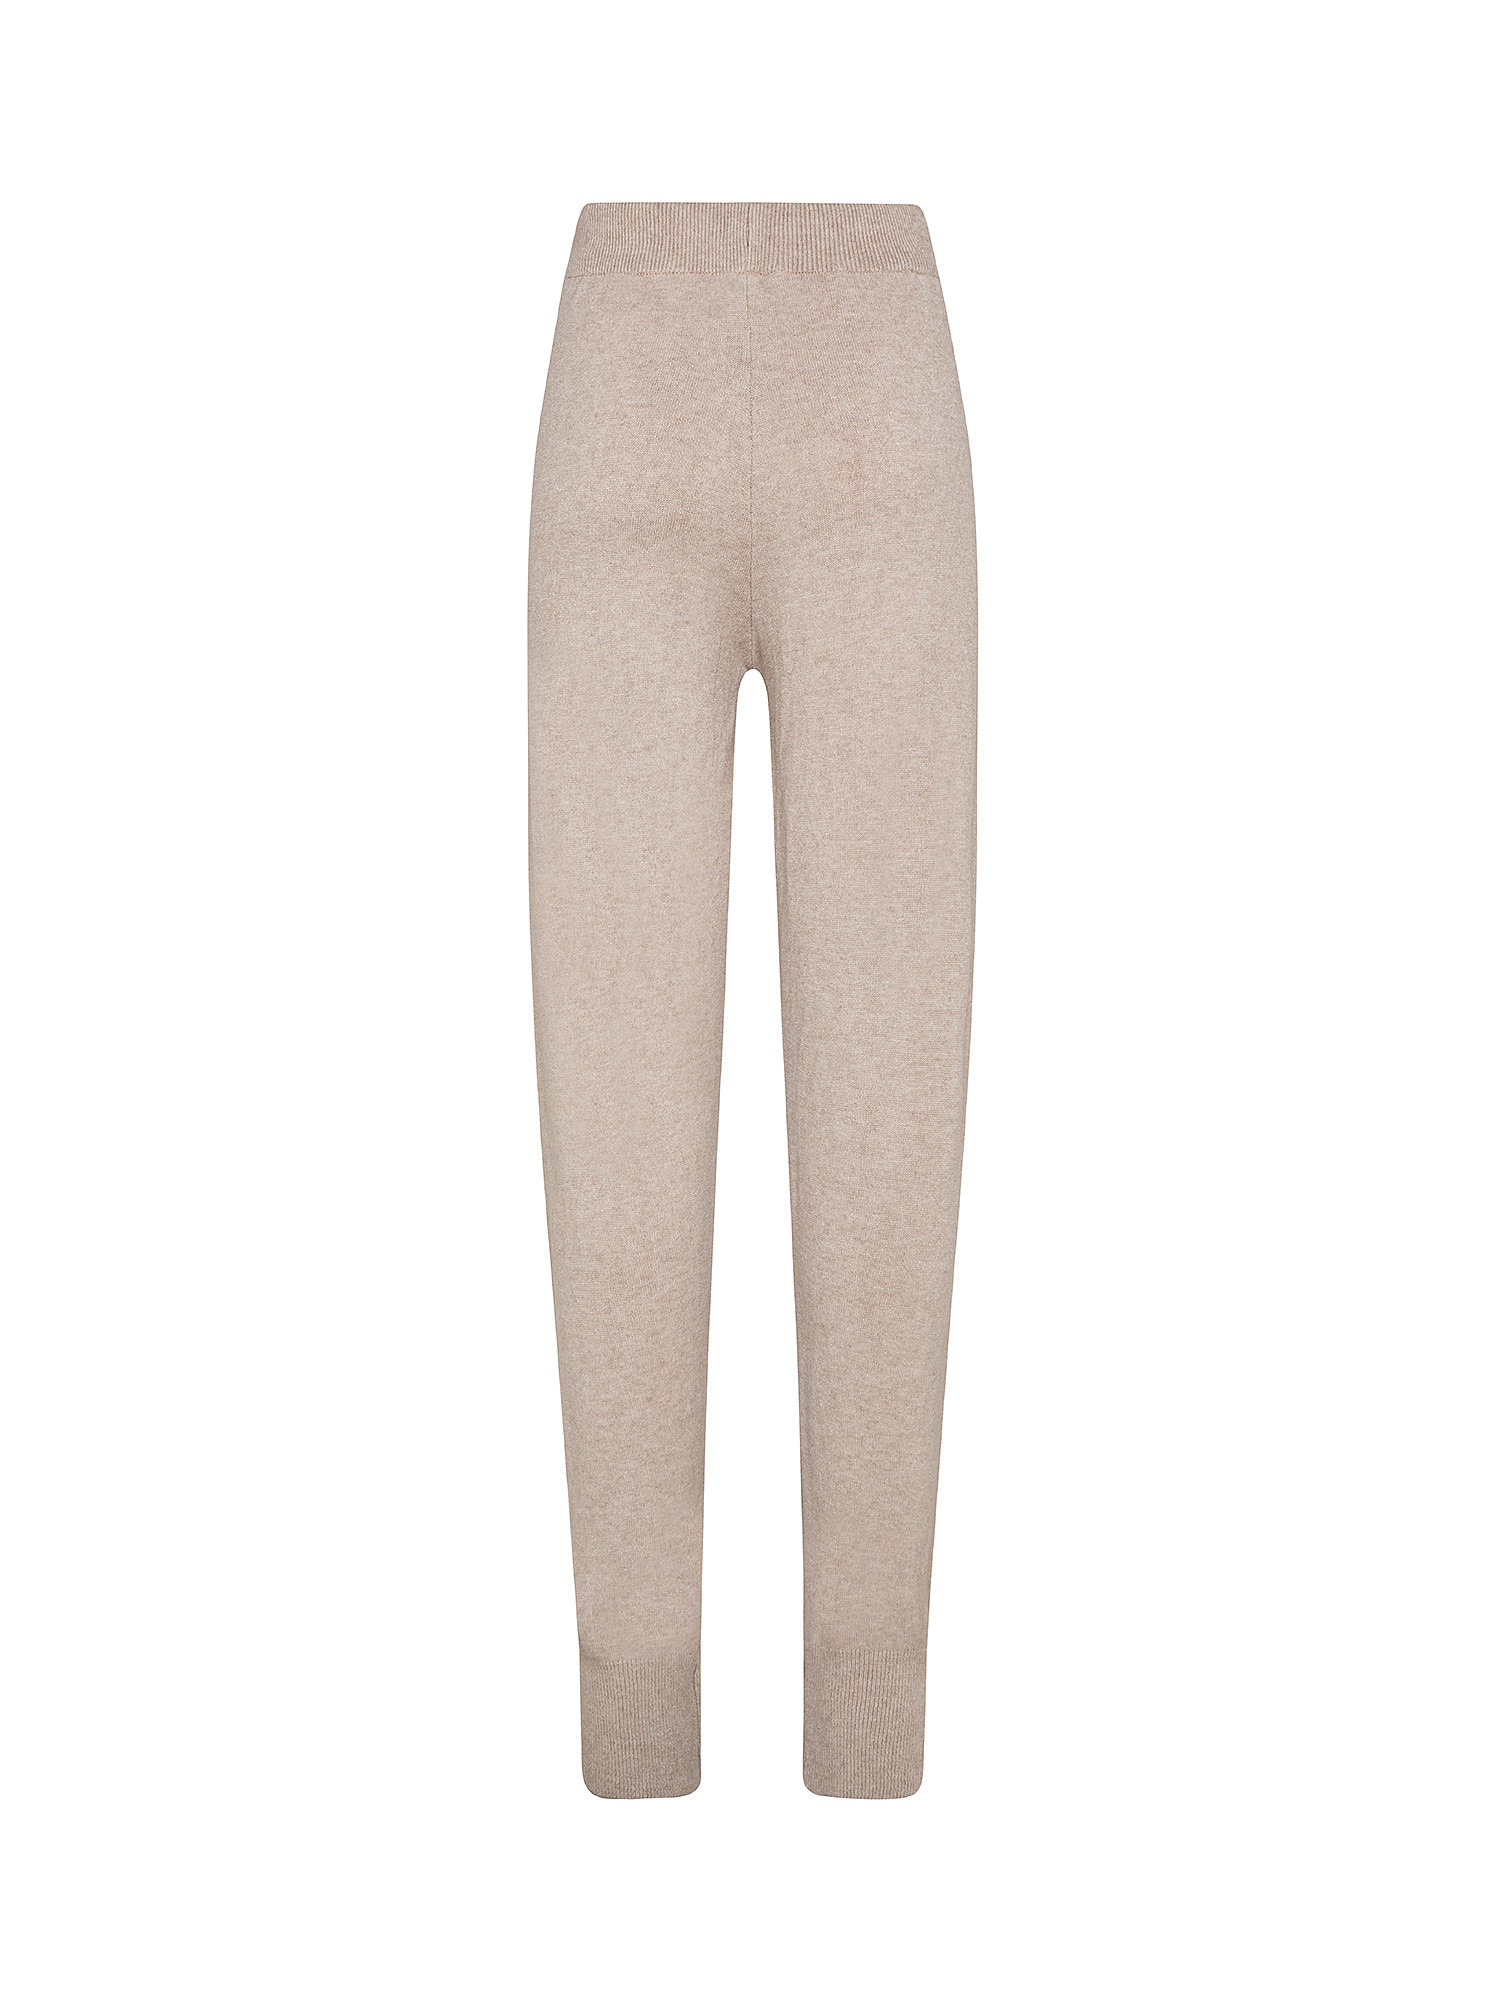 Knitted trousers, Beige, large image number 1